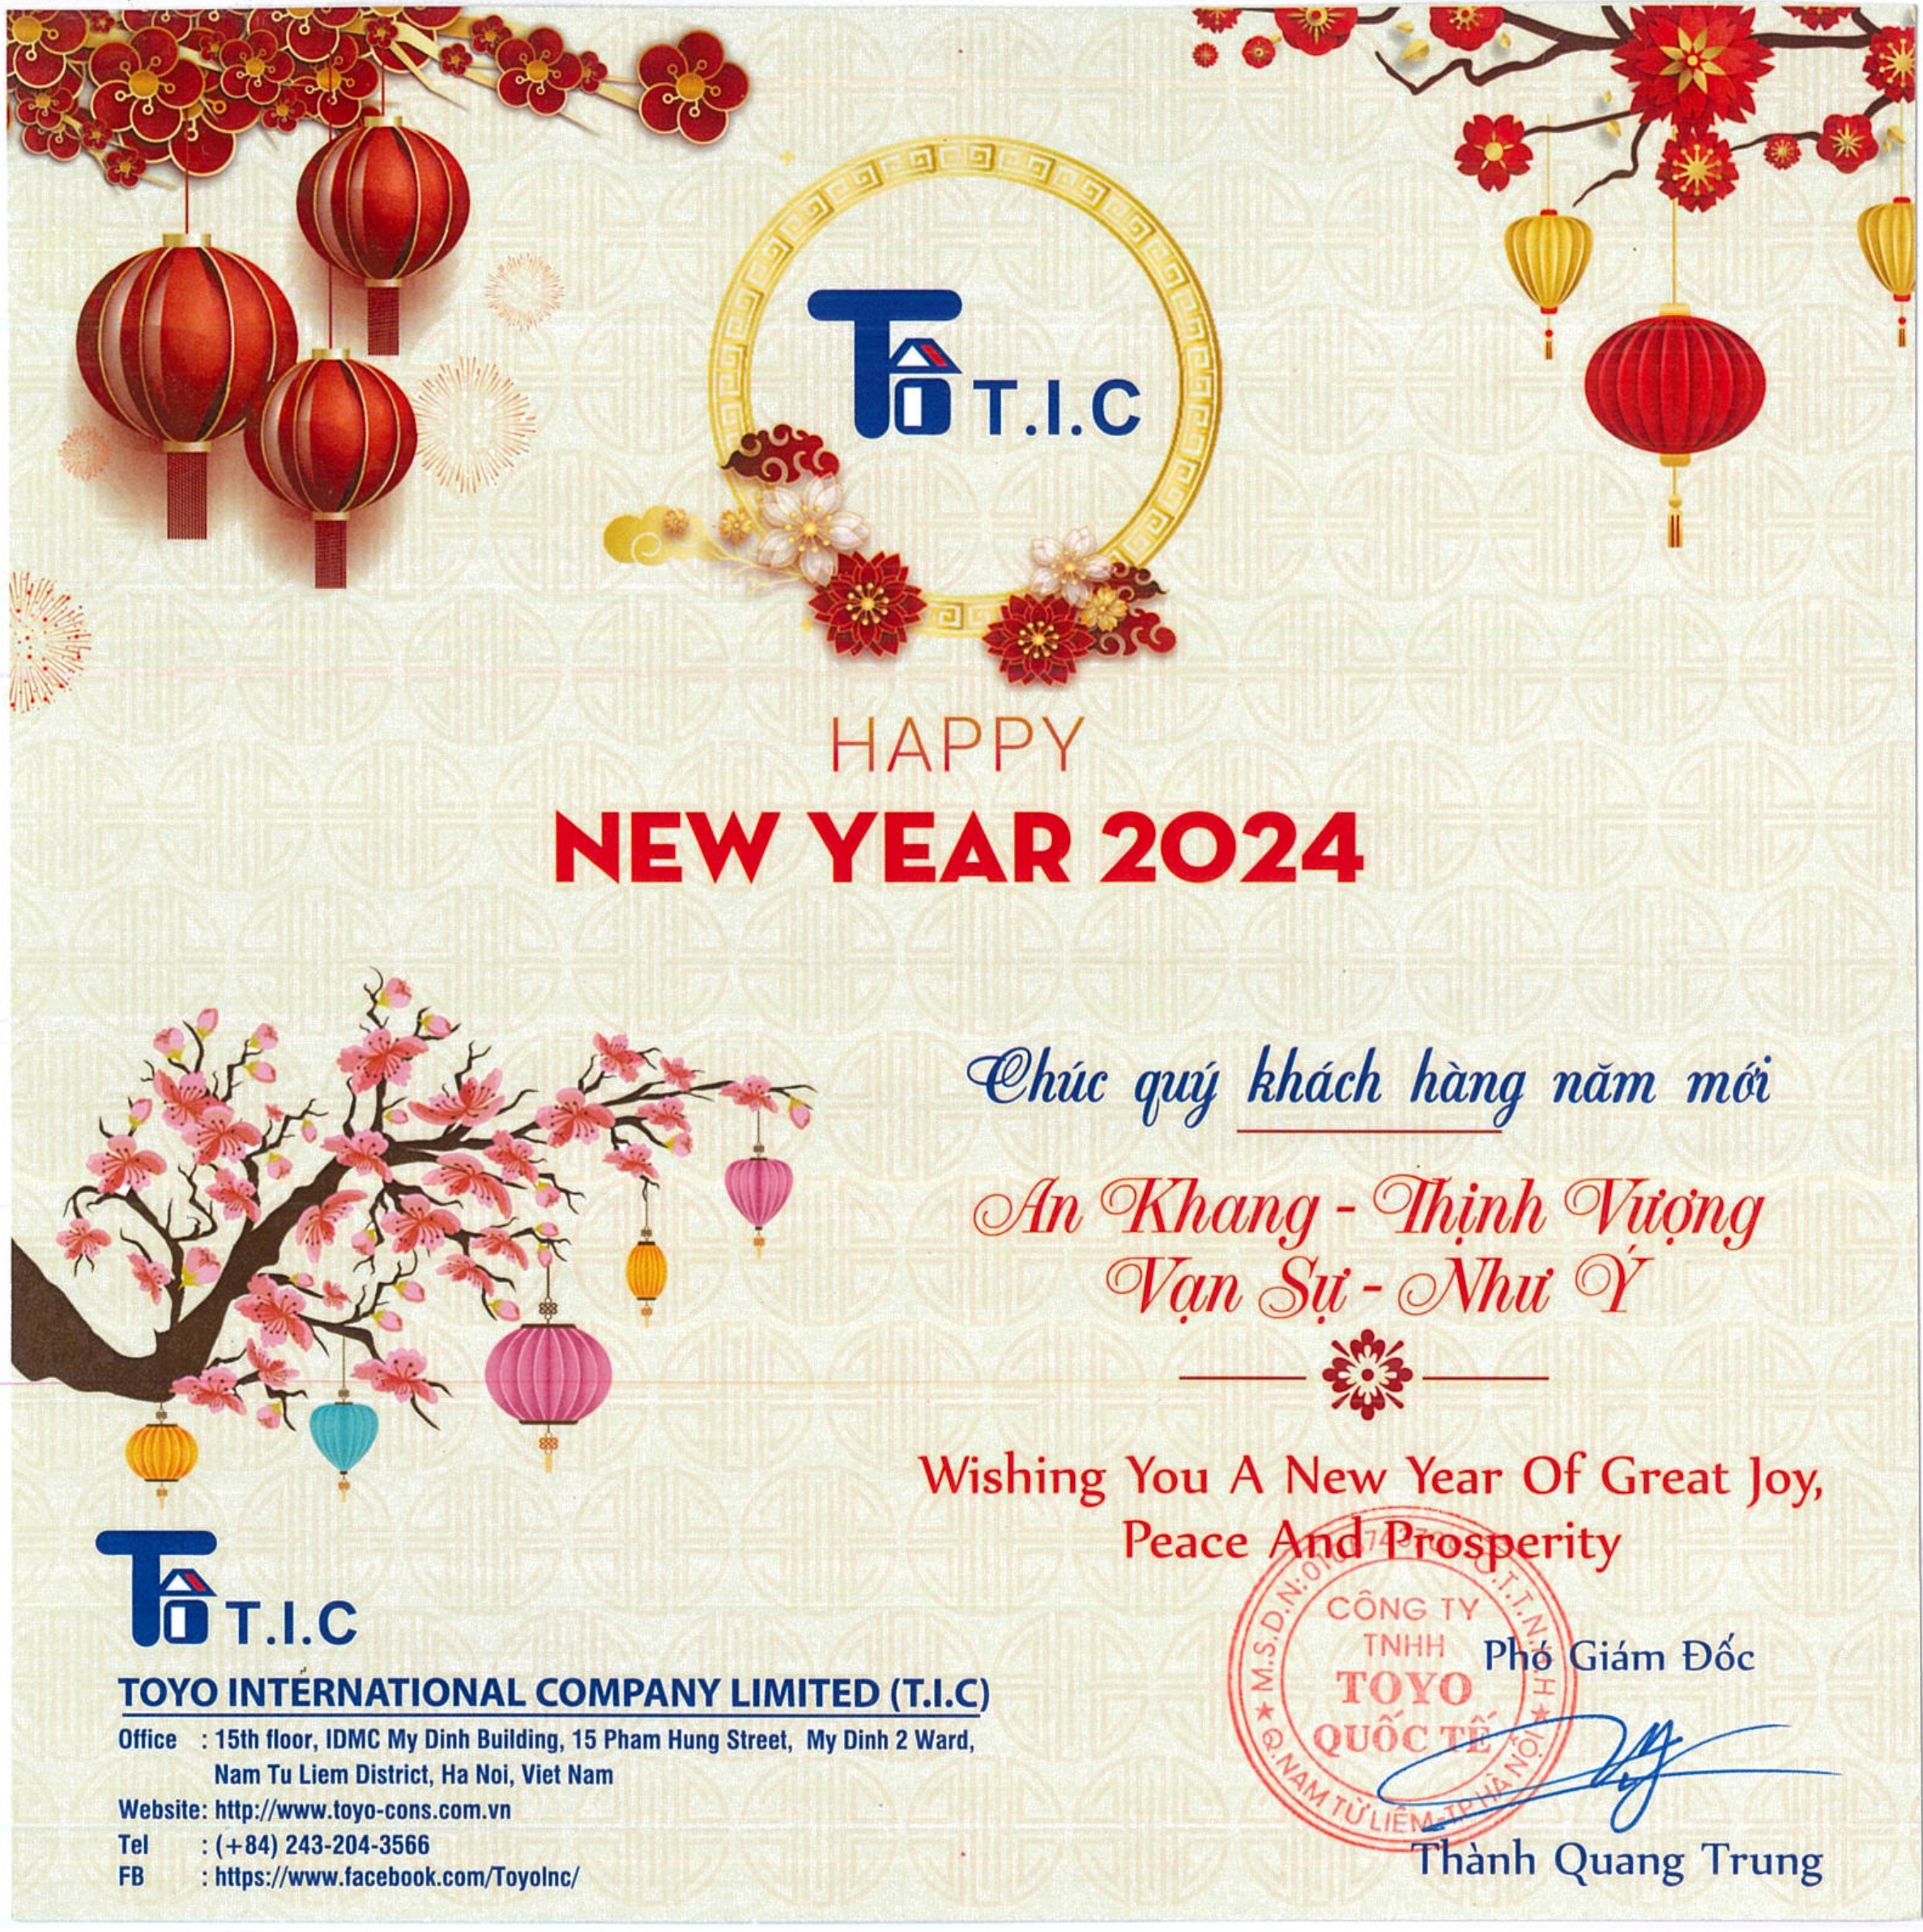 T.I.C'S HAPPY LUNAR NEW YEAR WISHES TO CUSTOMERS AND PARTNERS